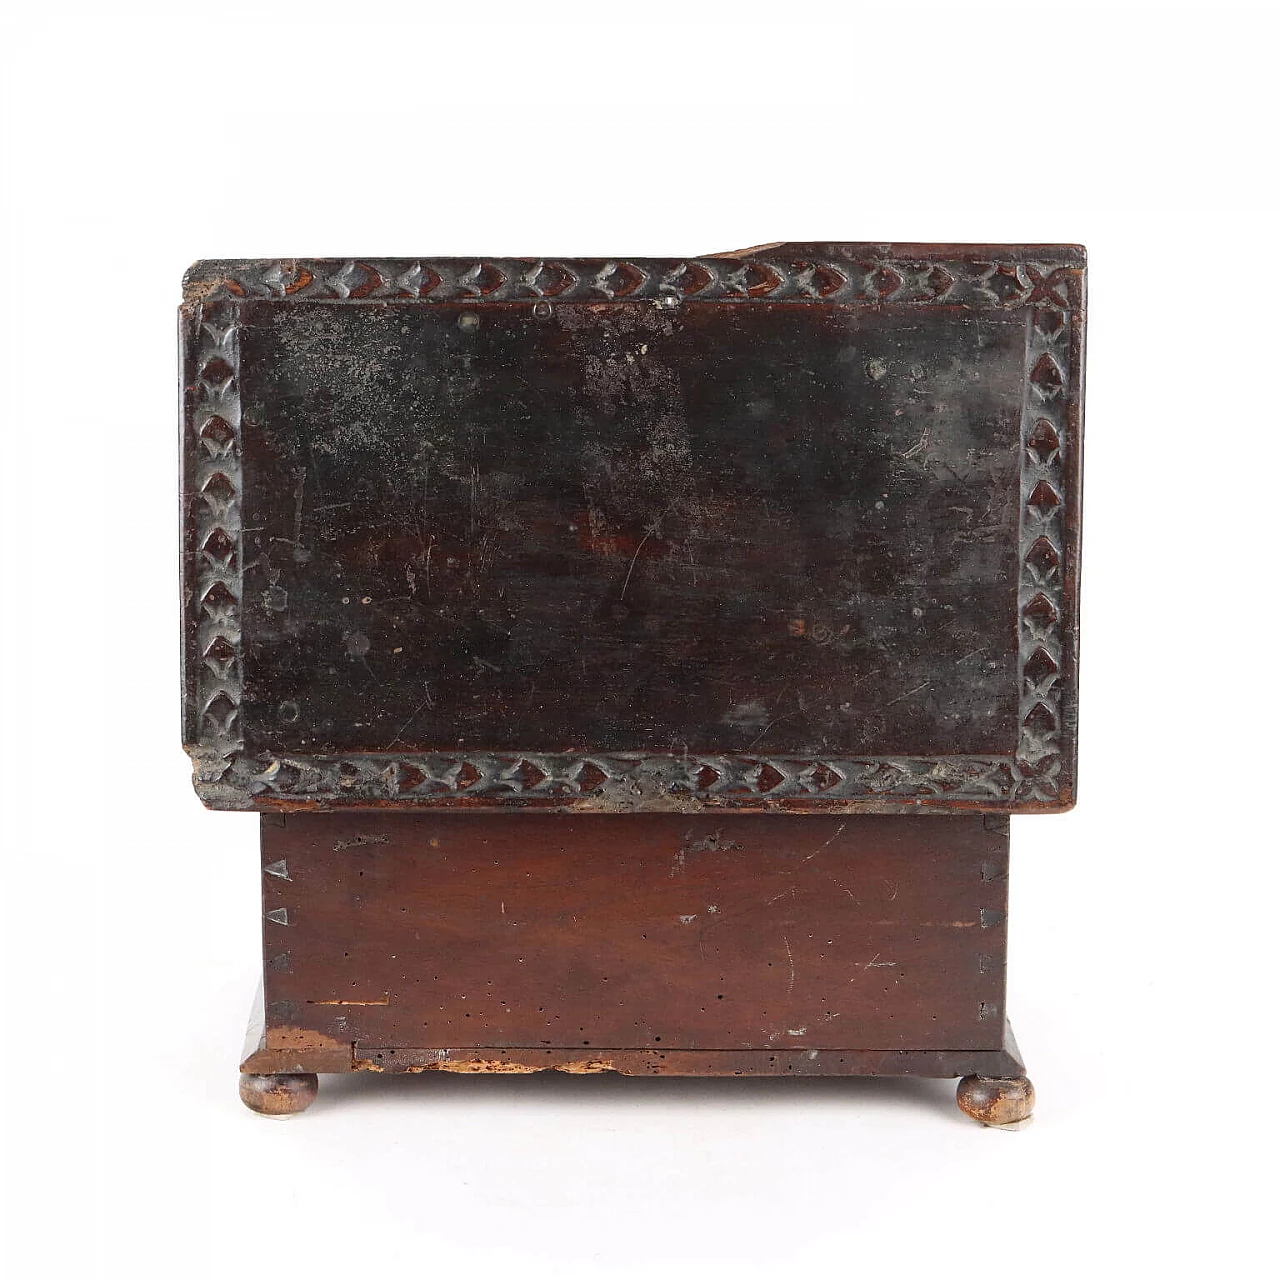 Late Renaissance walnut box with carved front, early 17th century 9